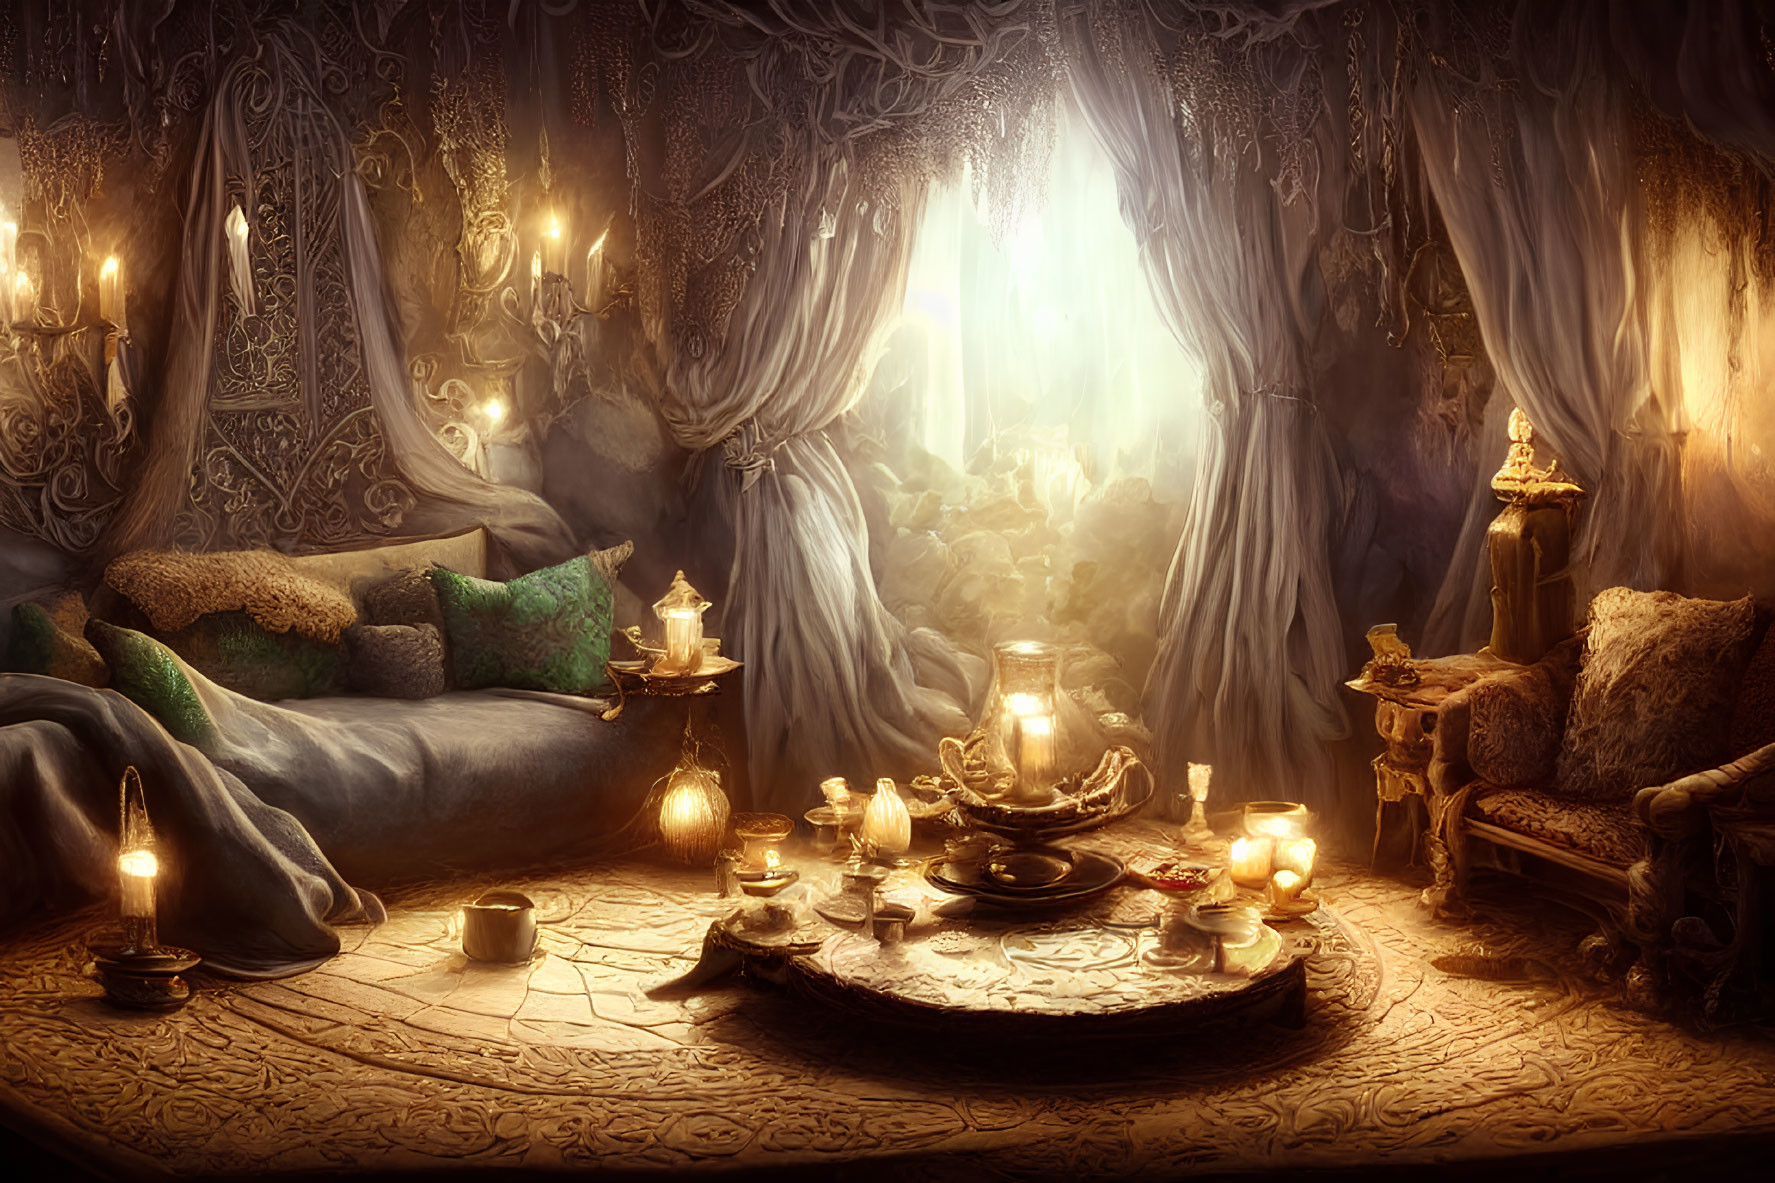 Luxurious room with lush cushions, ornate lamps, candles, chandelier, and mystical green glow